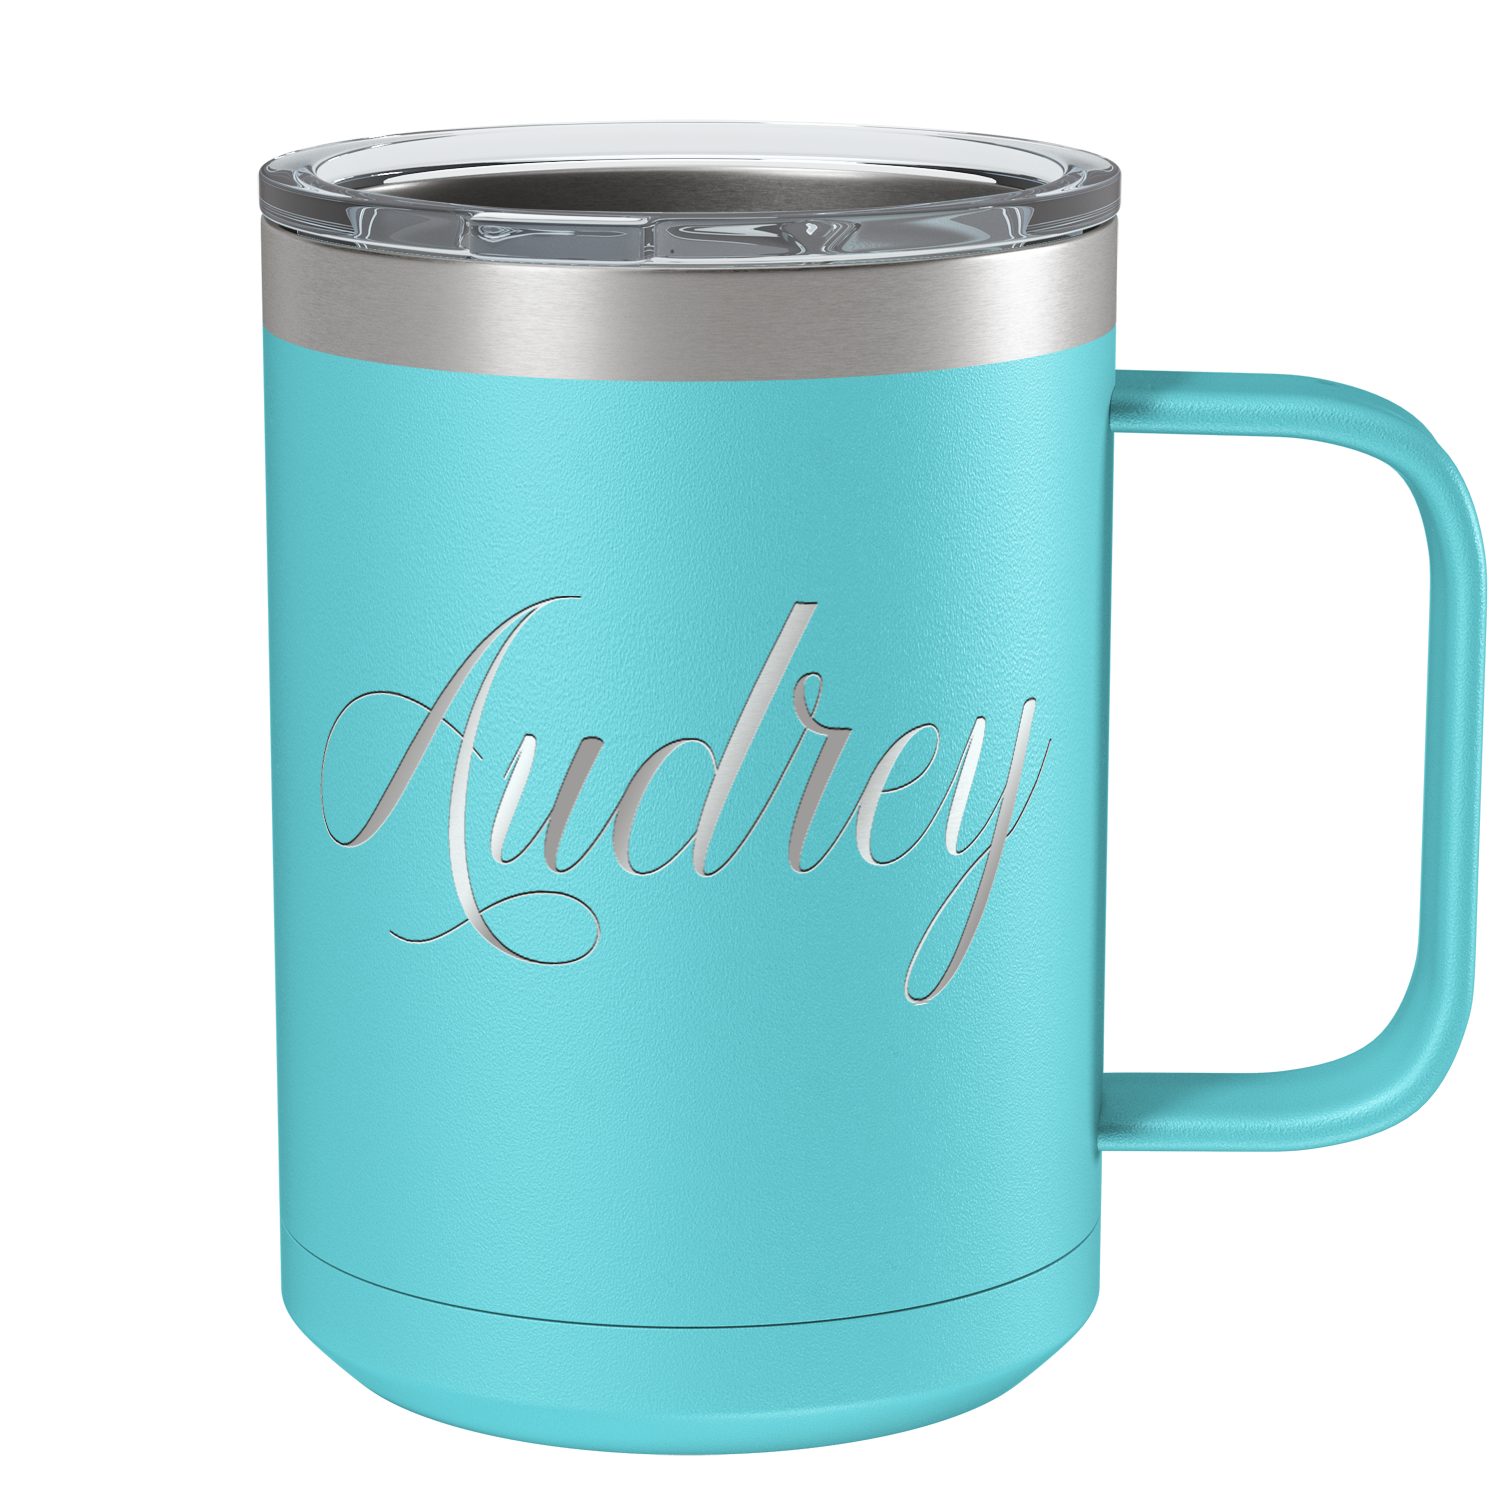 Cuptify Personalized Engraved 15 oz Stainless Steel Coffee Mug - Lite Blue